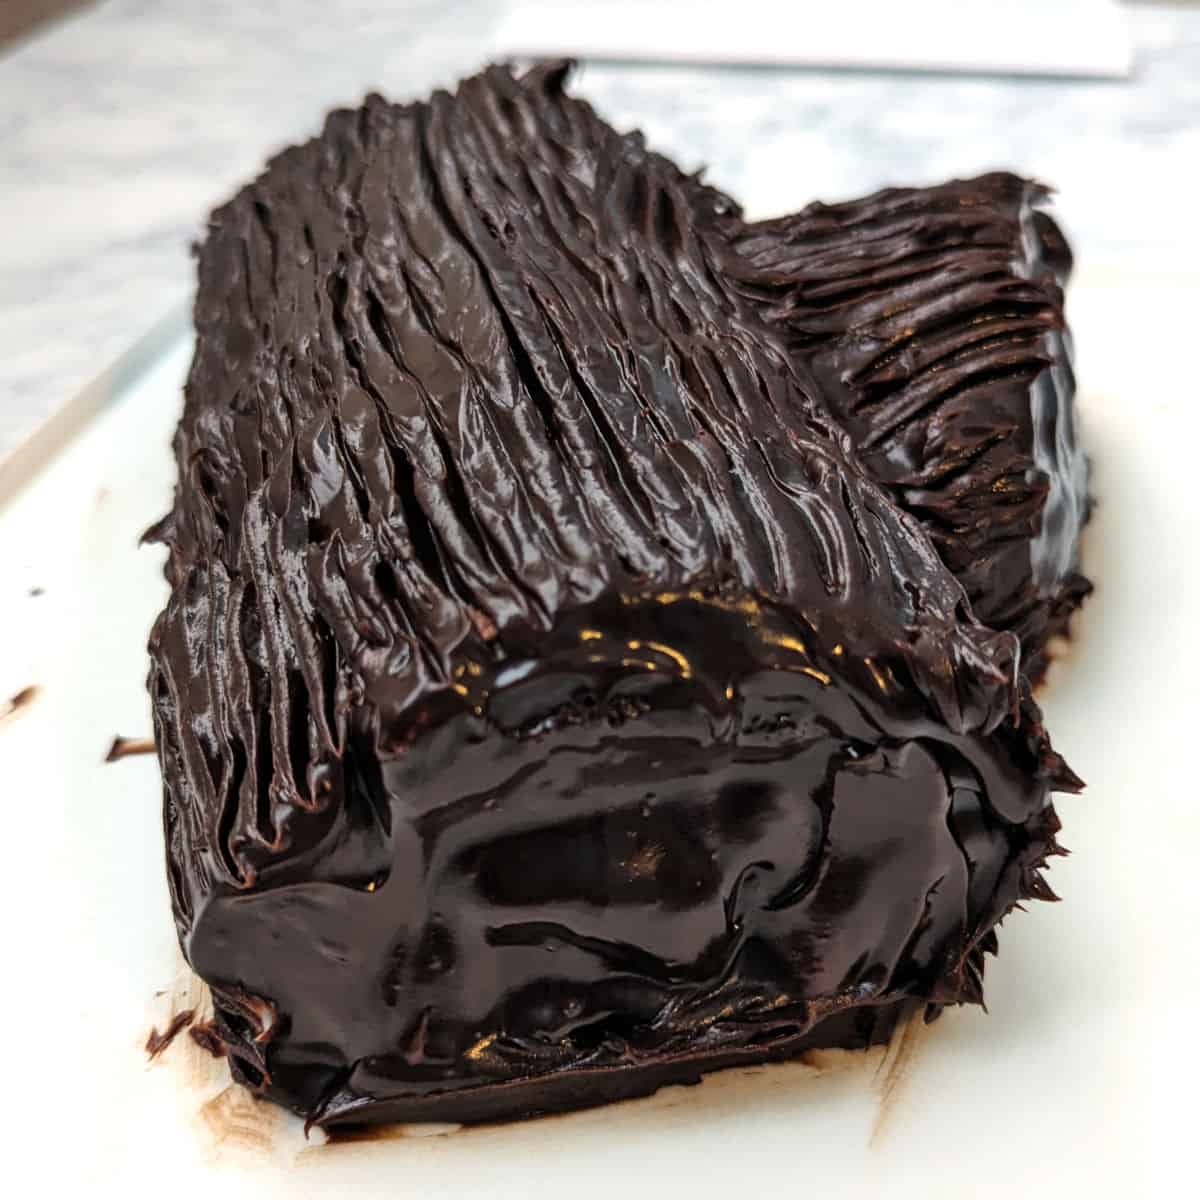 yule log, with lines made in the ganache with the tines of a fork